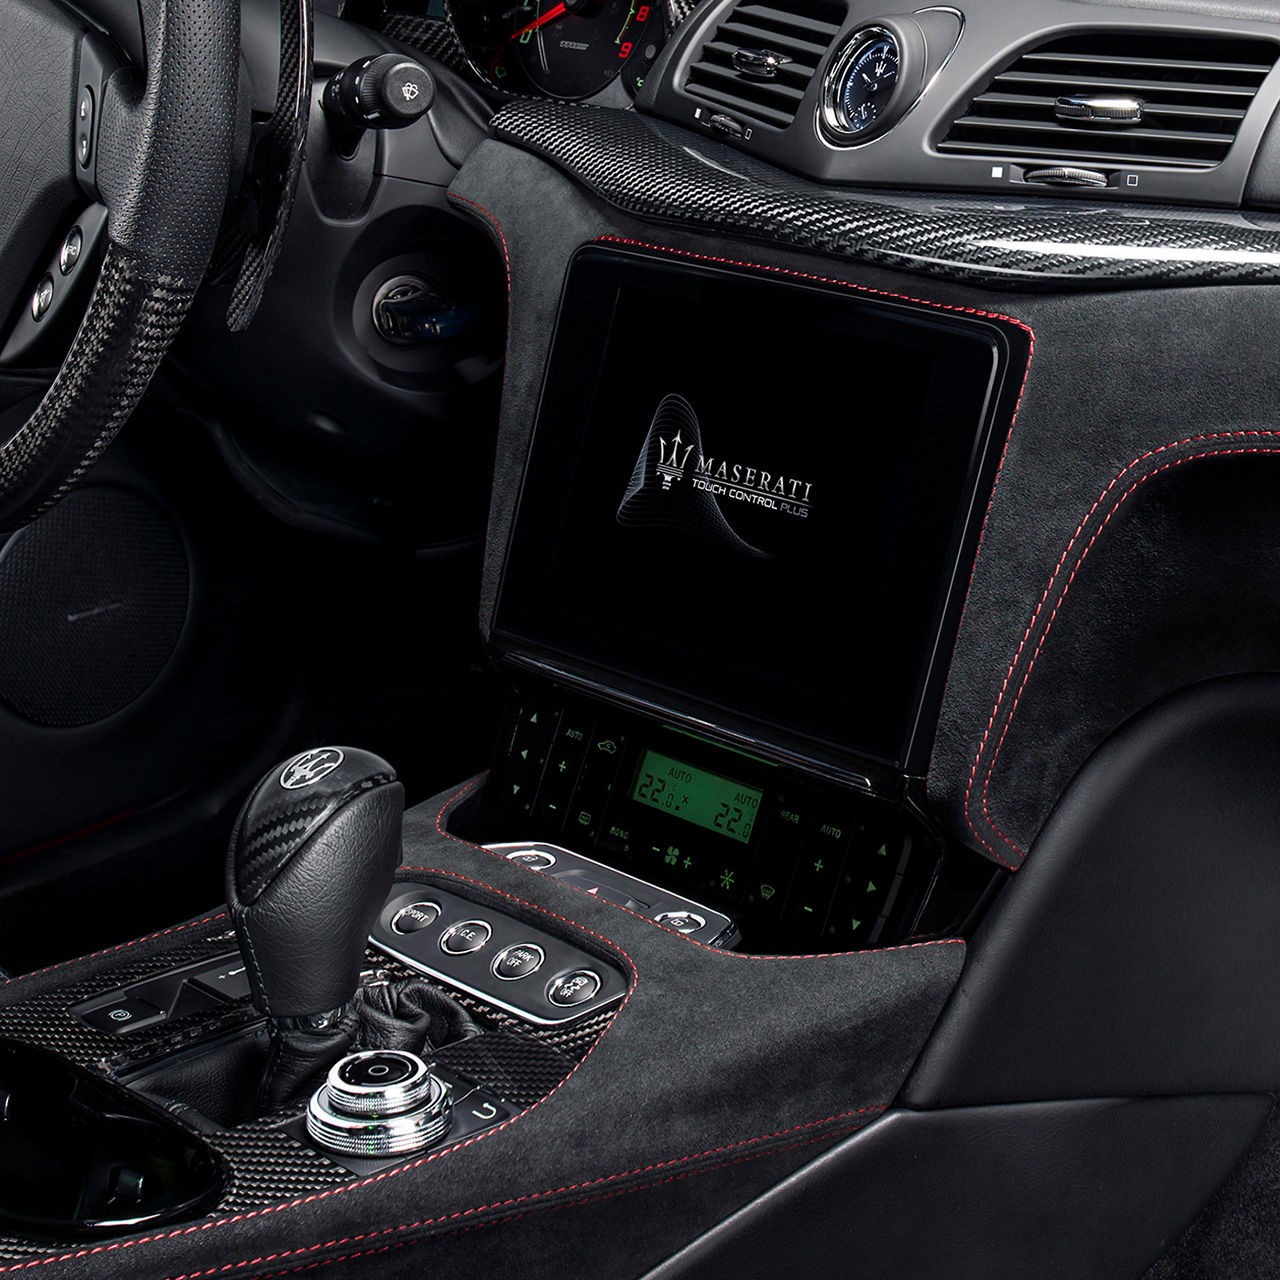 Maserati GranTurismo - new infotainment system, touchscreen display and interior's details